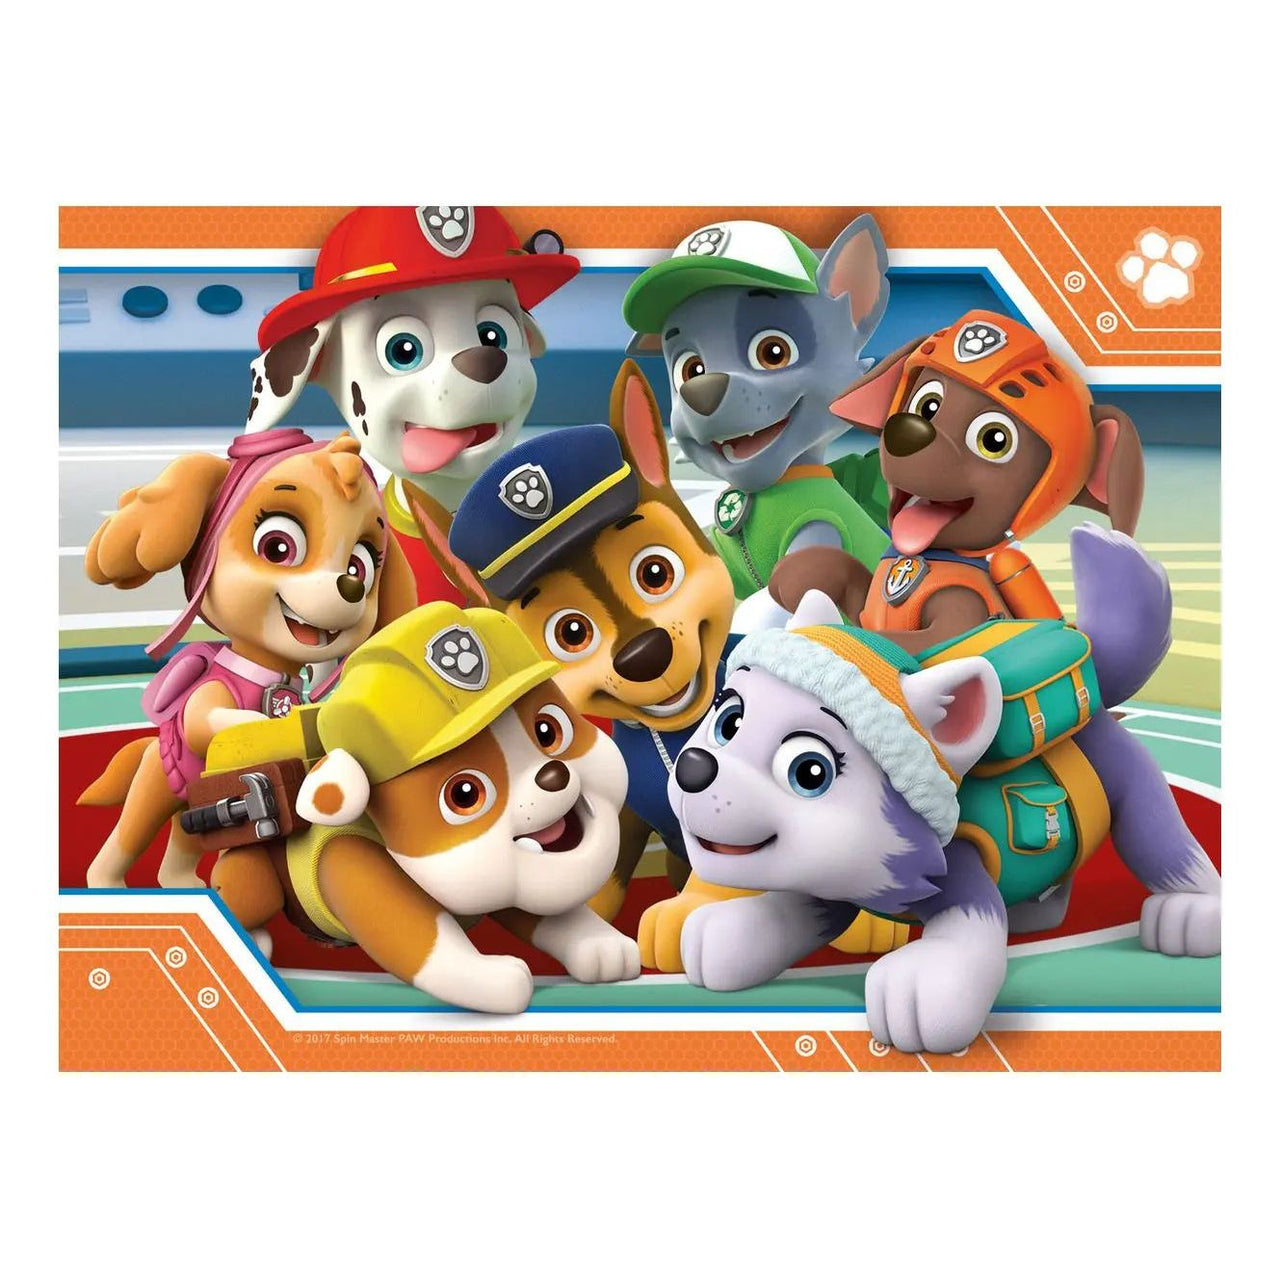 Paw Patrol 4 in a Box Jigsaw Puzzle Ravensburger